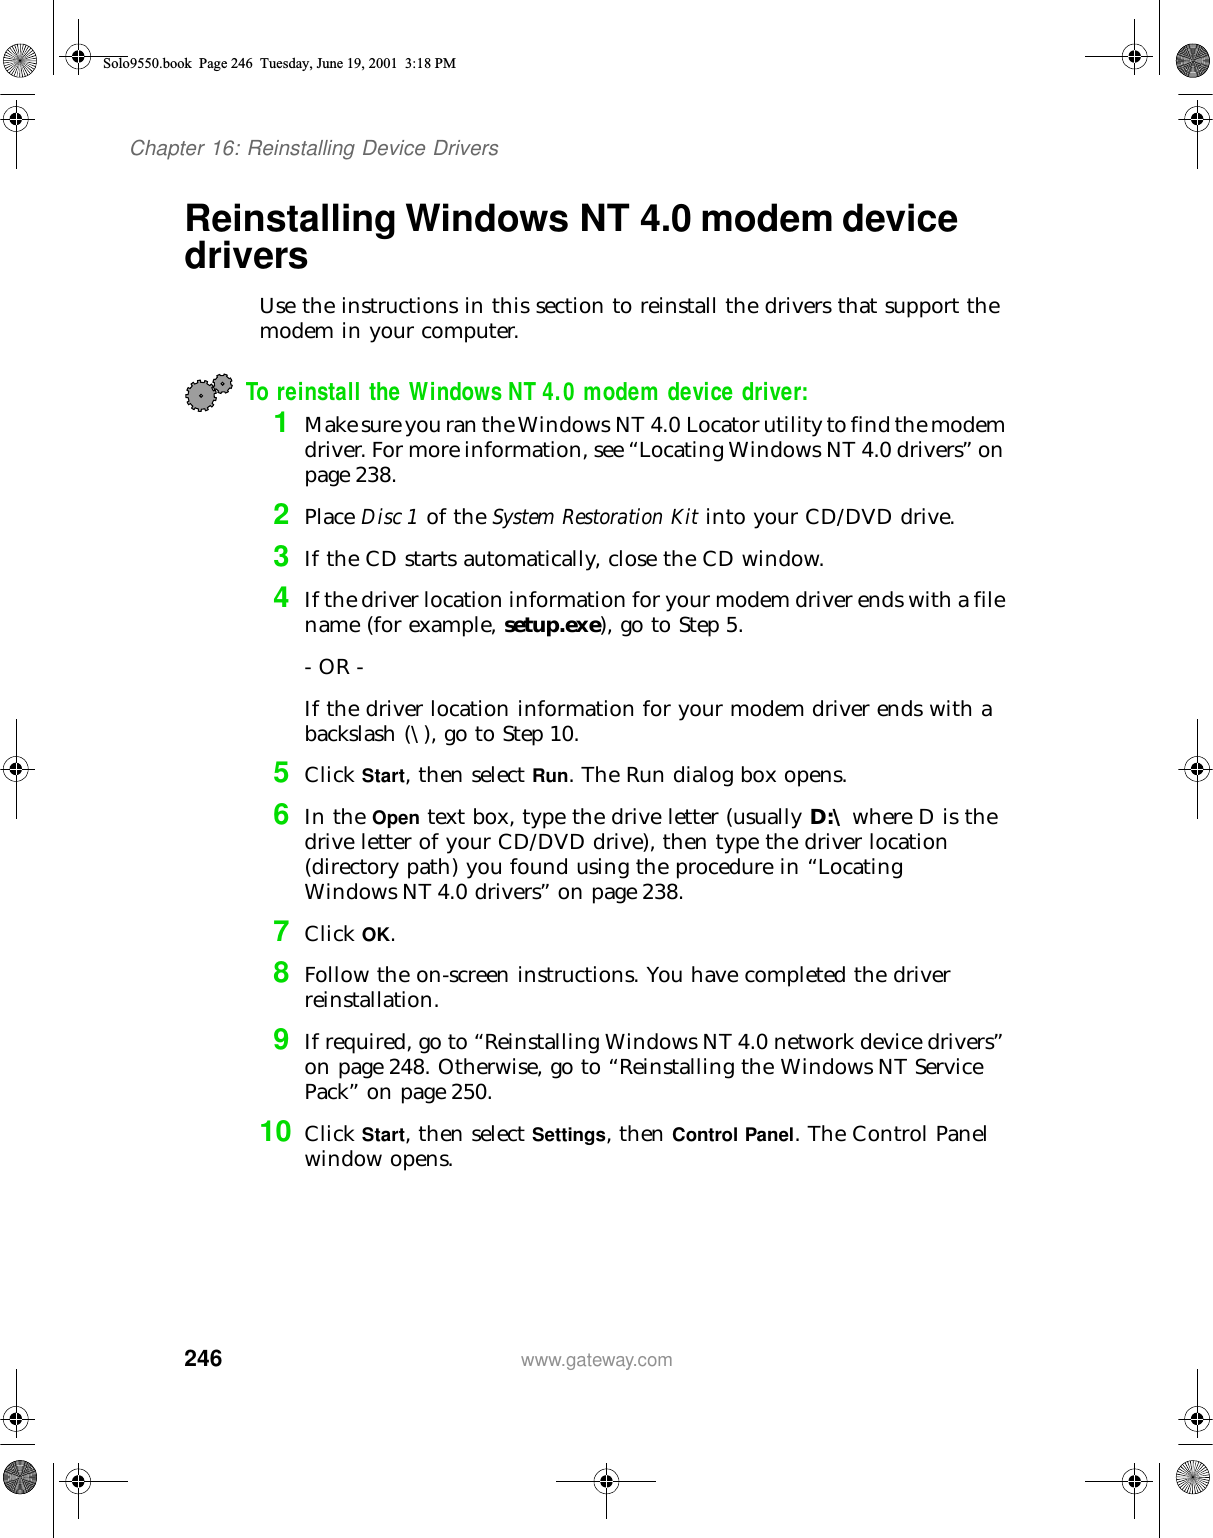 246Chapter 16: Reinstalling Device Driverswww.gateway.comReinstalling Windows NT 4.0 modem device driversUse the instructions in this section to reinstall the drivers that support the modem in your computer.To reinstall the Windows NT 4.0 modem device driver:1Make sure you ran the Windows NT 4.0 Locator utility to find the modem driver. For more information, see “Locating Windows NT 4.0 drivers” on page 238.2Place Disc 1 of the System Restoration Kit into your CD/DVD drive.3If the CD starts automatically, close the CD window.4If the driver location information for your modem driver ends with a file name (for example, setup.exe), go to Step 5.- OR -If the driver location information for your modem driver ends with a backslash (\), go to Step 10.5Click Start, then select Run. The Run dialog box opens.6In the Open text box, type the drive letter (usually D:\ where D is the drive letter of your CD/DVD drive), then type the driver location (directory path) you found using the procedure in “Locating Windows NT 4.0 drivers” on page 238.7Click OK.8Follow the on-screen instructions. You have completed the driver reinstallation.9If required, go to “Reinstalling Windows NT 4.0 network device drivers” on page 248. Otherwise, go to “Reinstalling the Windows NT Service Pack” on page 250.10 Click Start, then select Settings, then Control Panel. The Control Panel window opens.Solo9550.book Page 246 Tuesday, June 19, 2001 3:18 PM